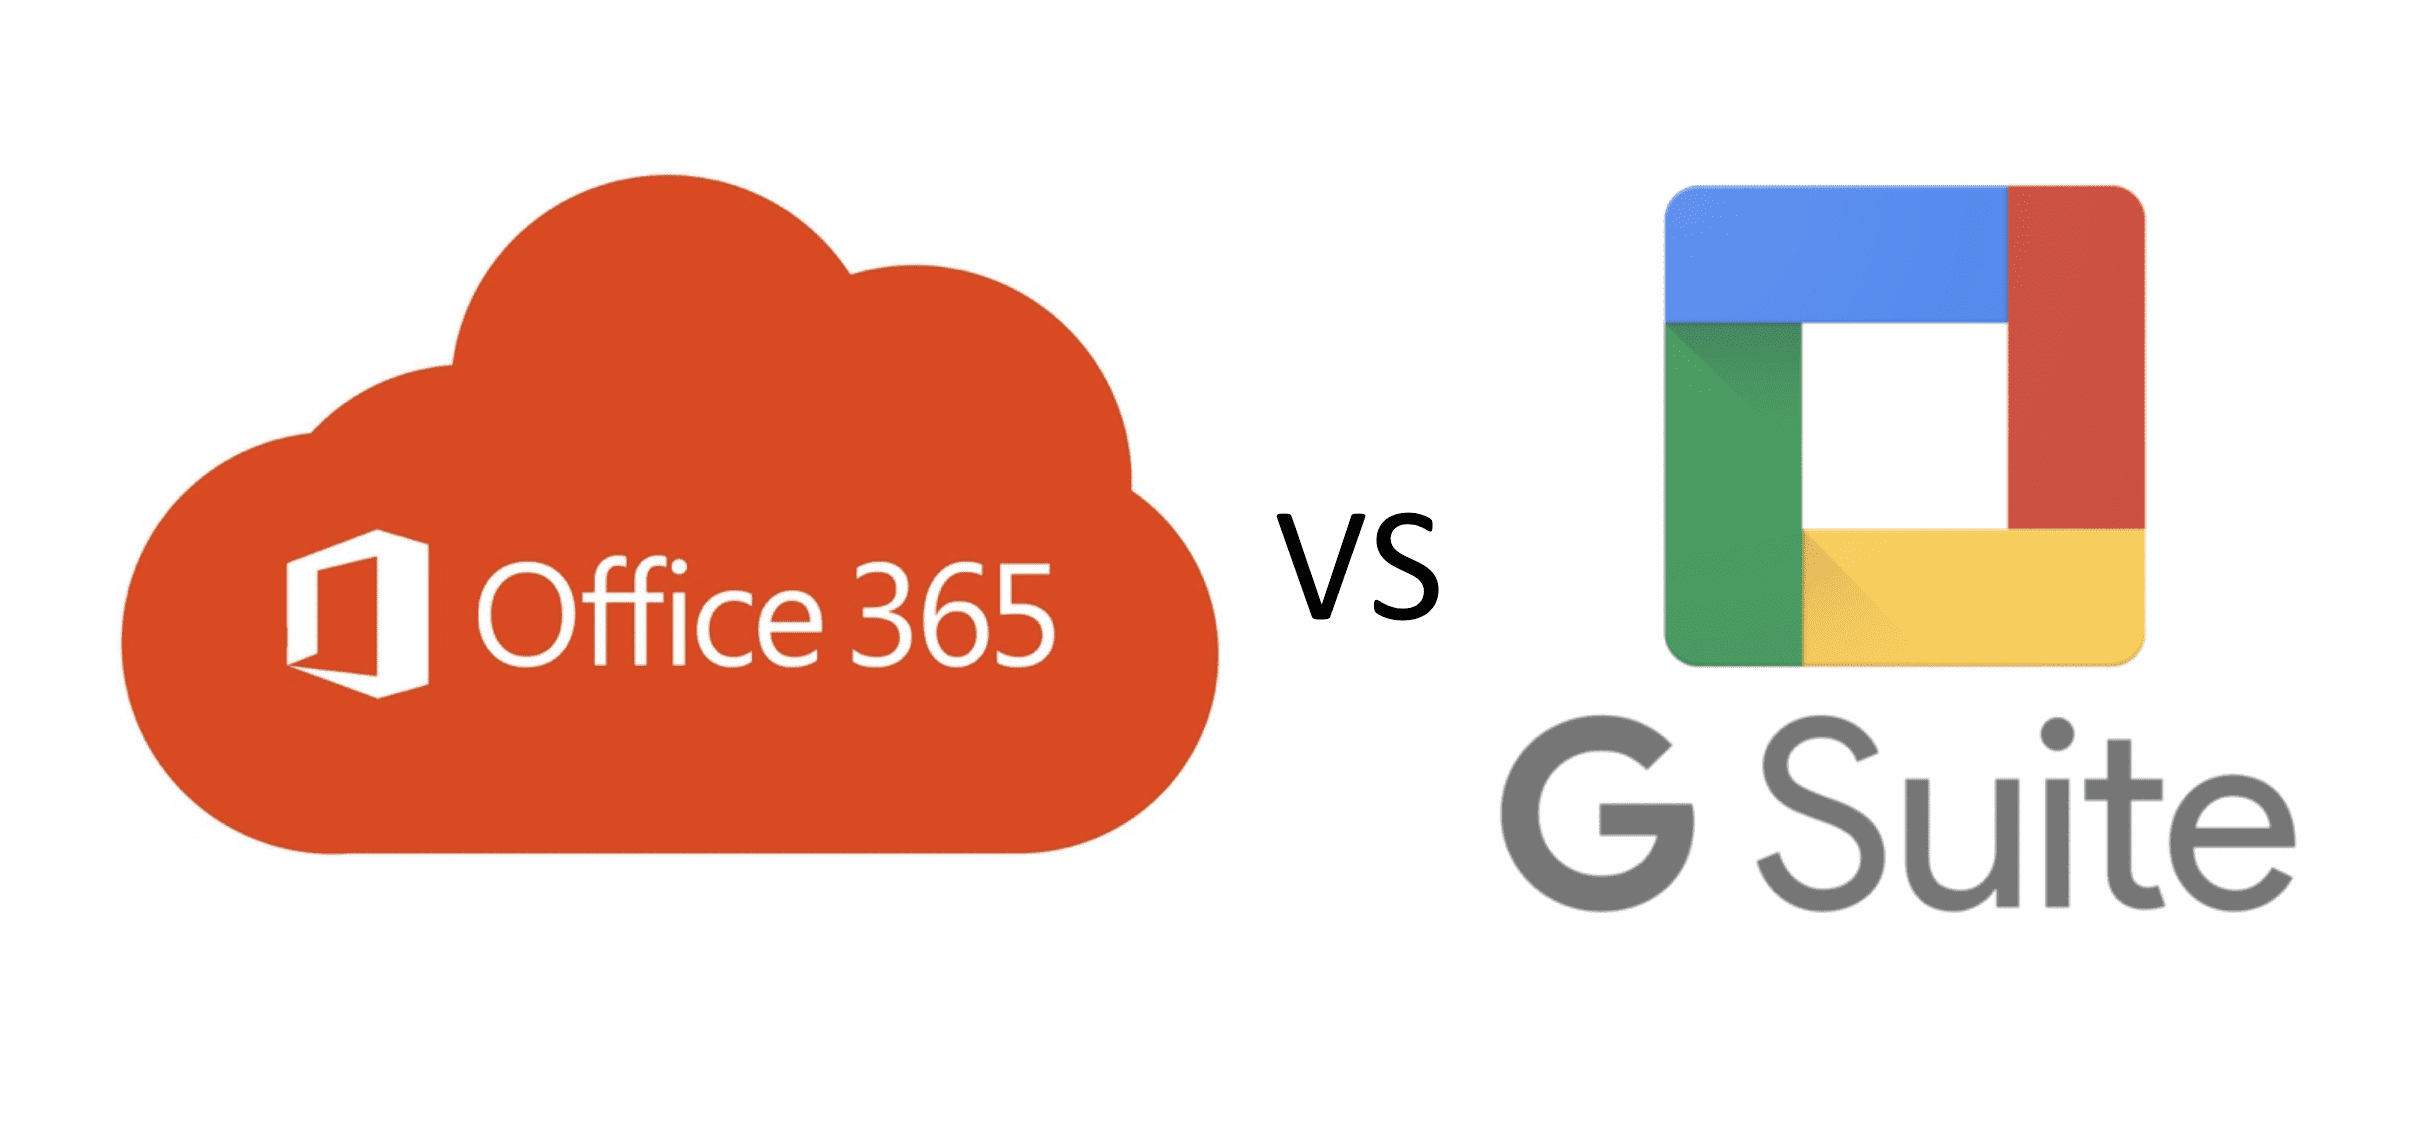 Which is Better from an Information Security Perspective: Office 365 or Google Apps?